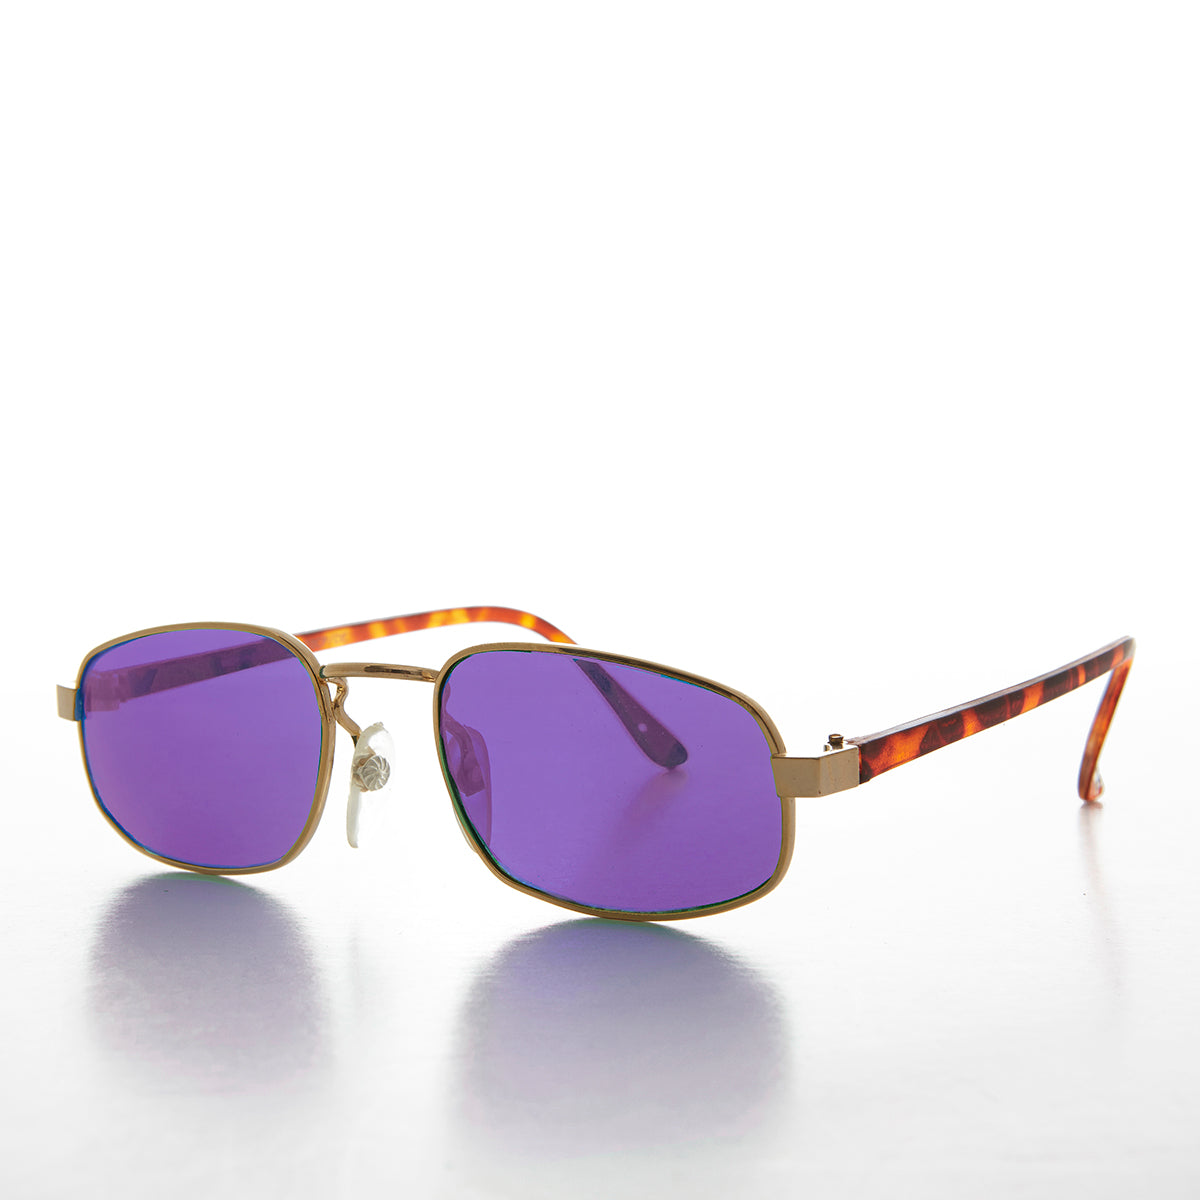 Small Rectangular Frame with Colored Tinted Lens - Jerry – Sunglass Museum